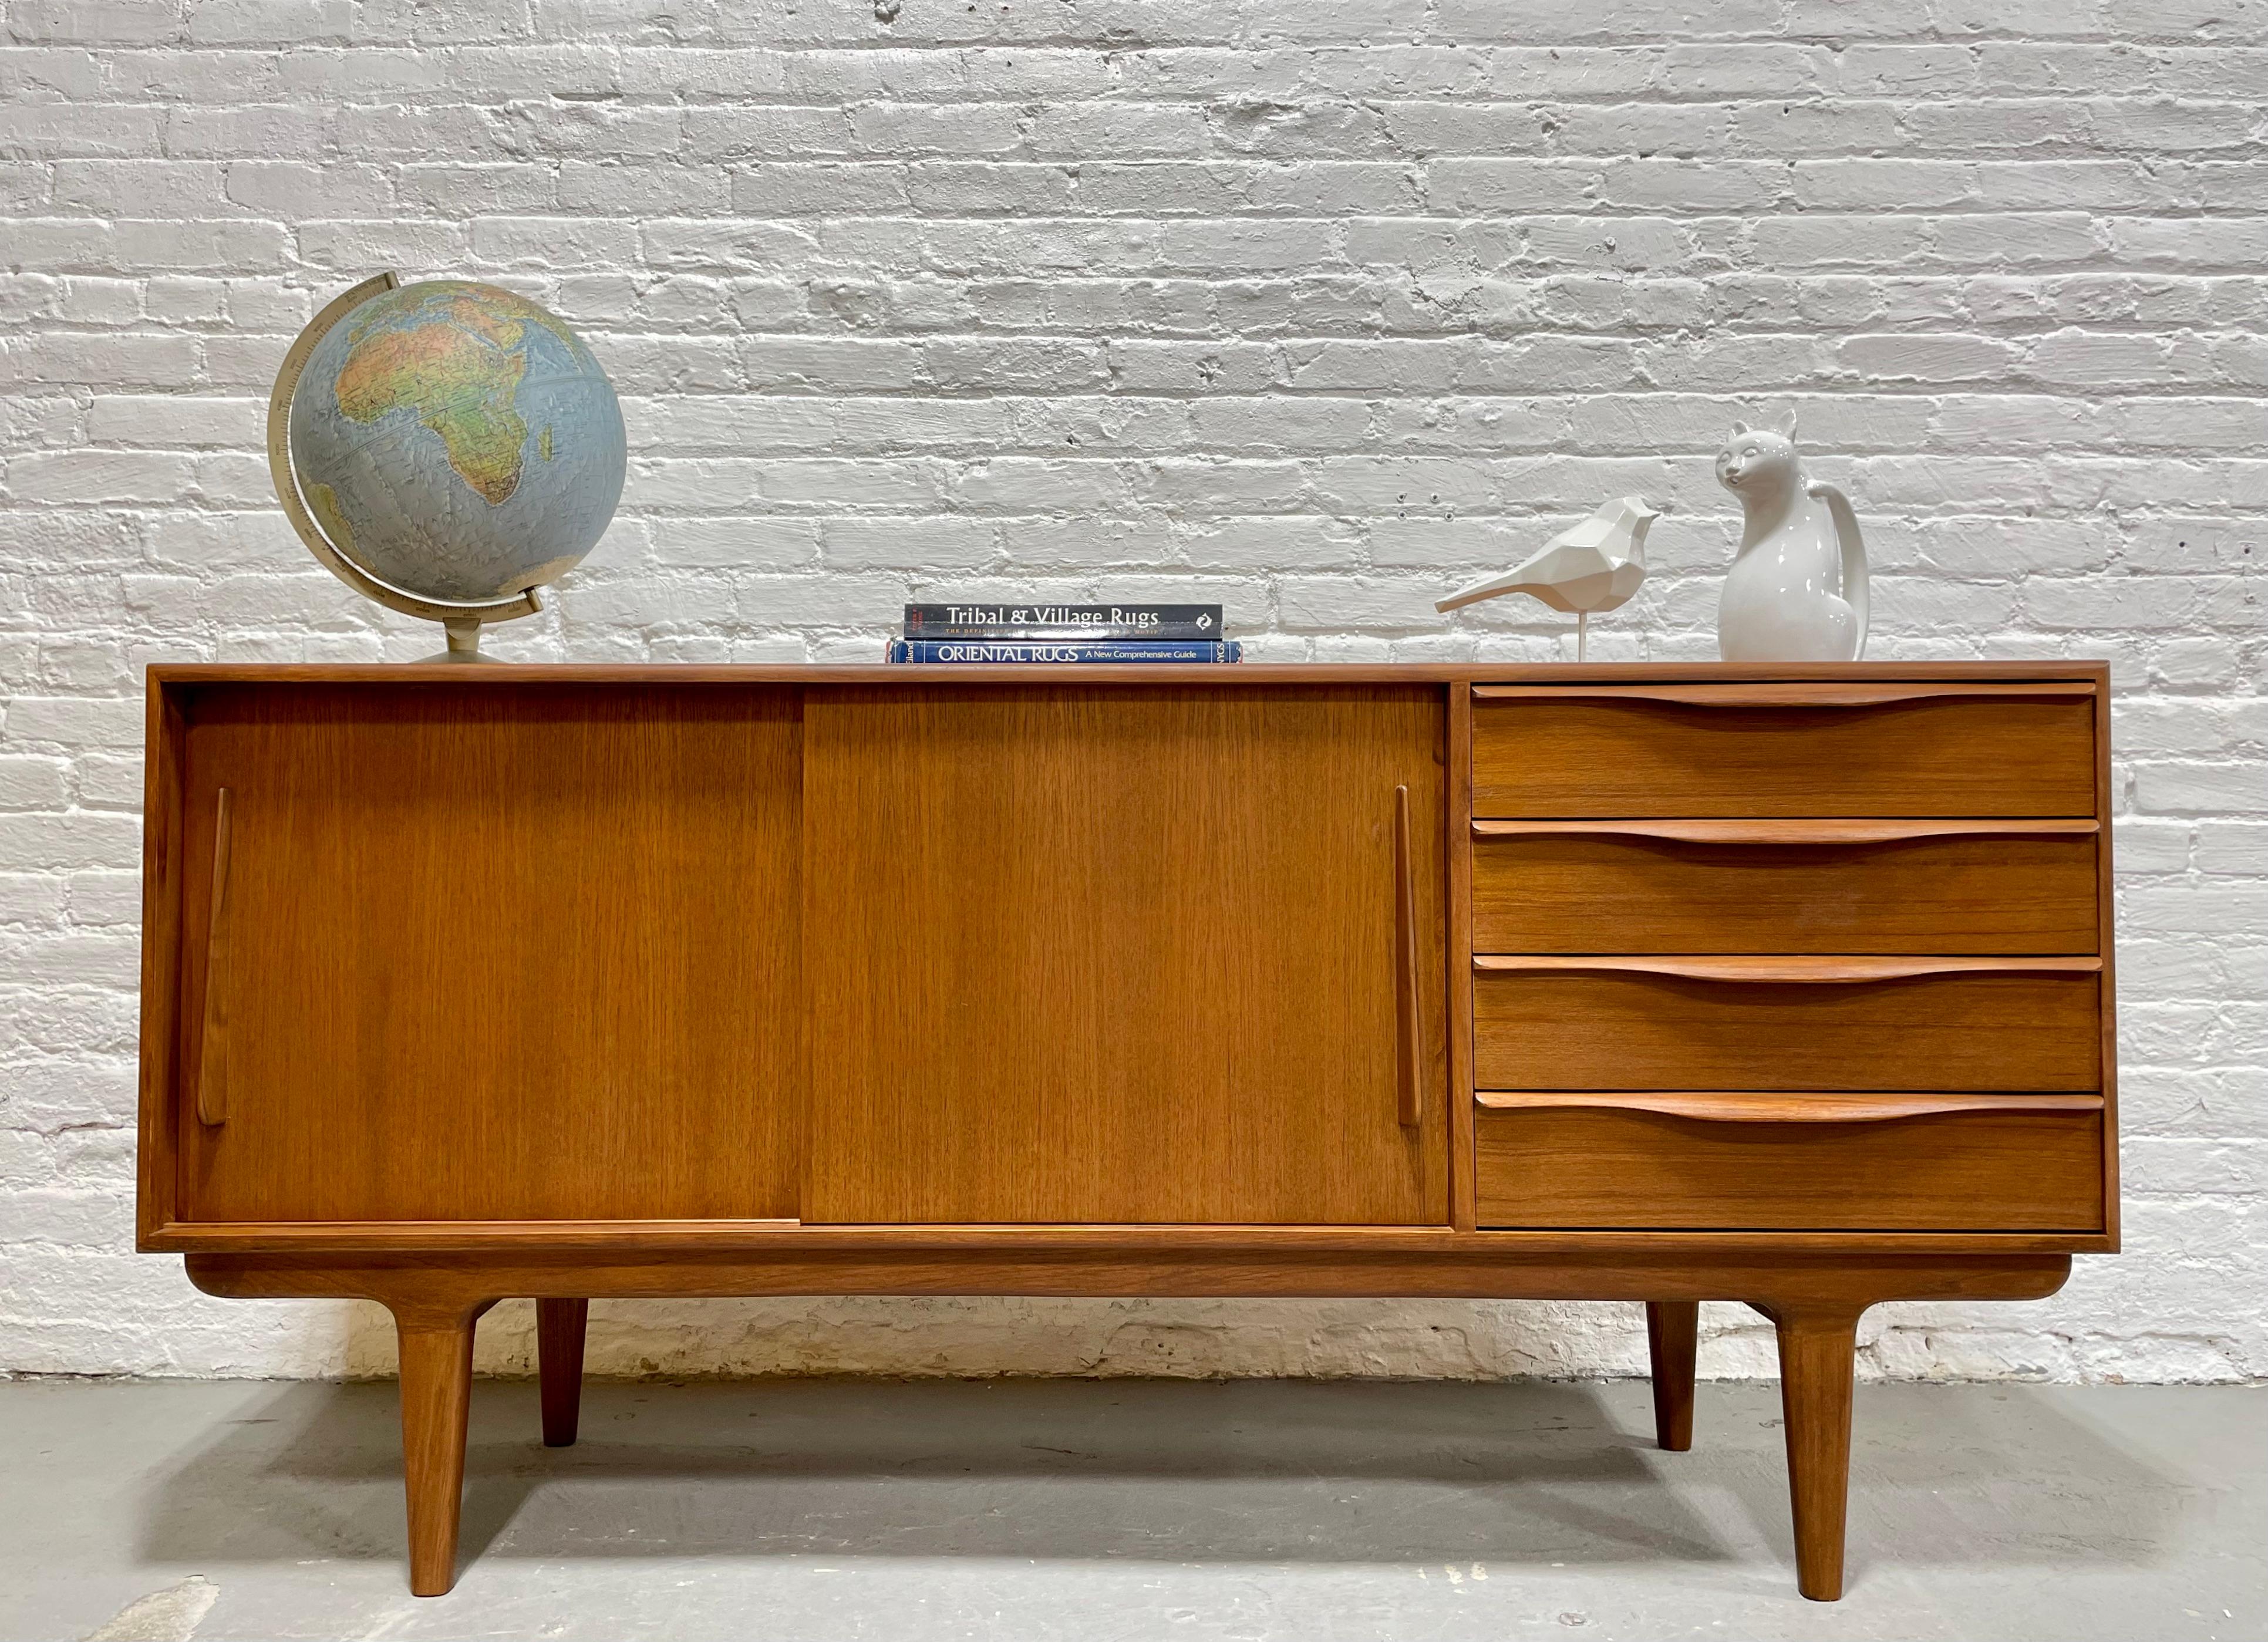 Mid-Century Modern styled Handmade Credenza / Media stand featuring exquisite sculptural hand pulls and plenty of shelving space for all your media components. Stunning wood grains and finished back allow you to float the credenza in a room.